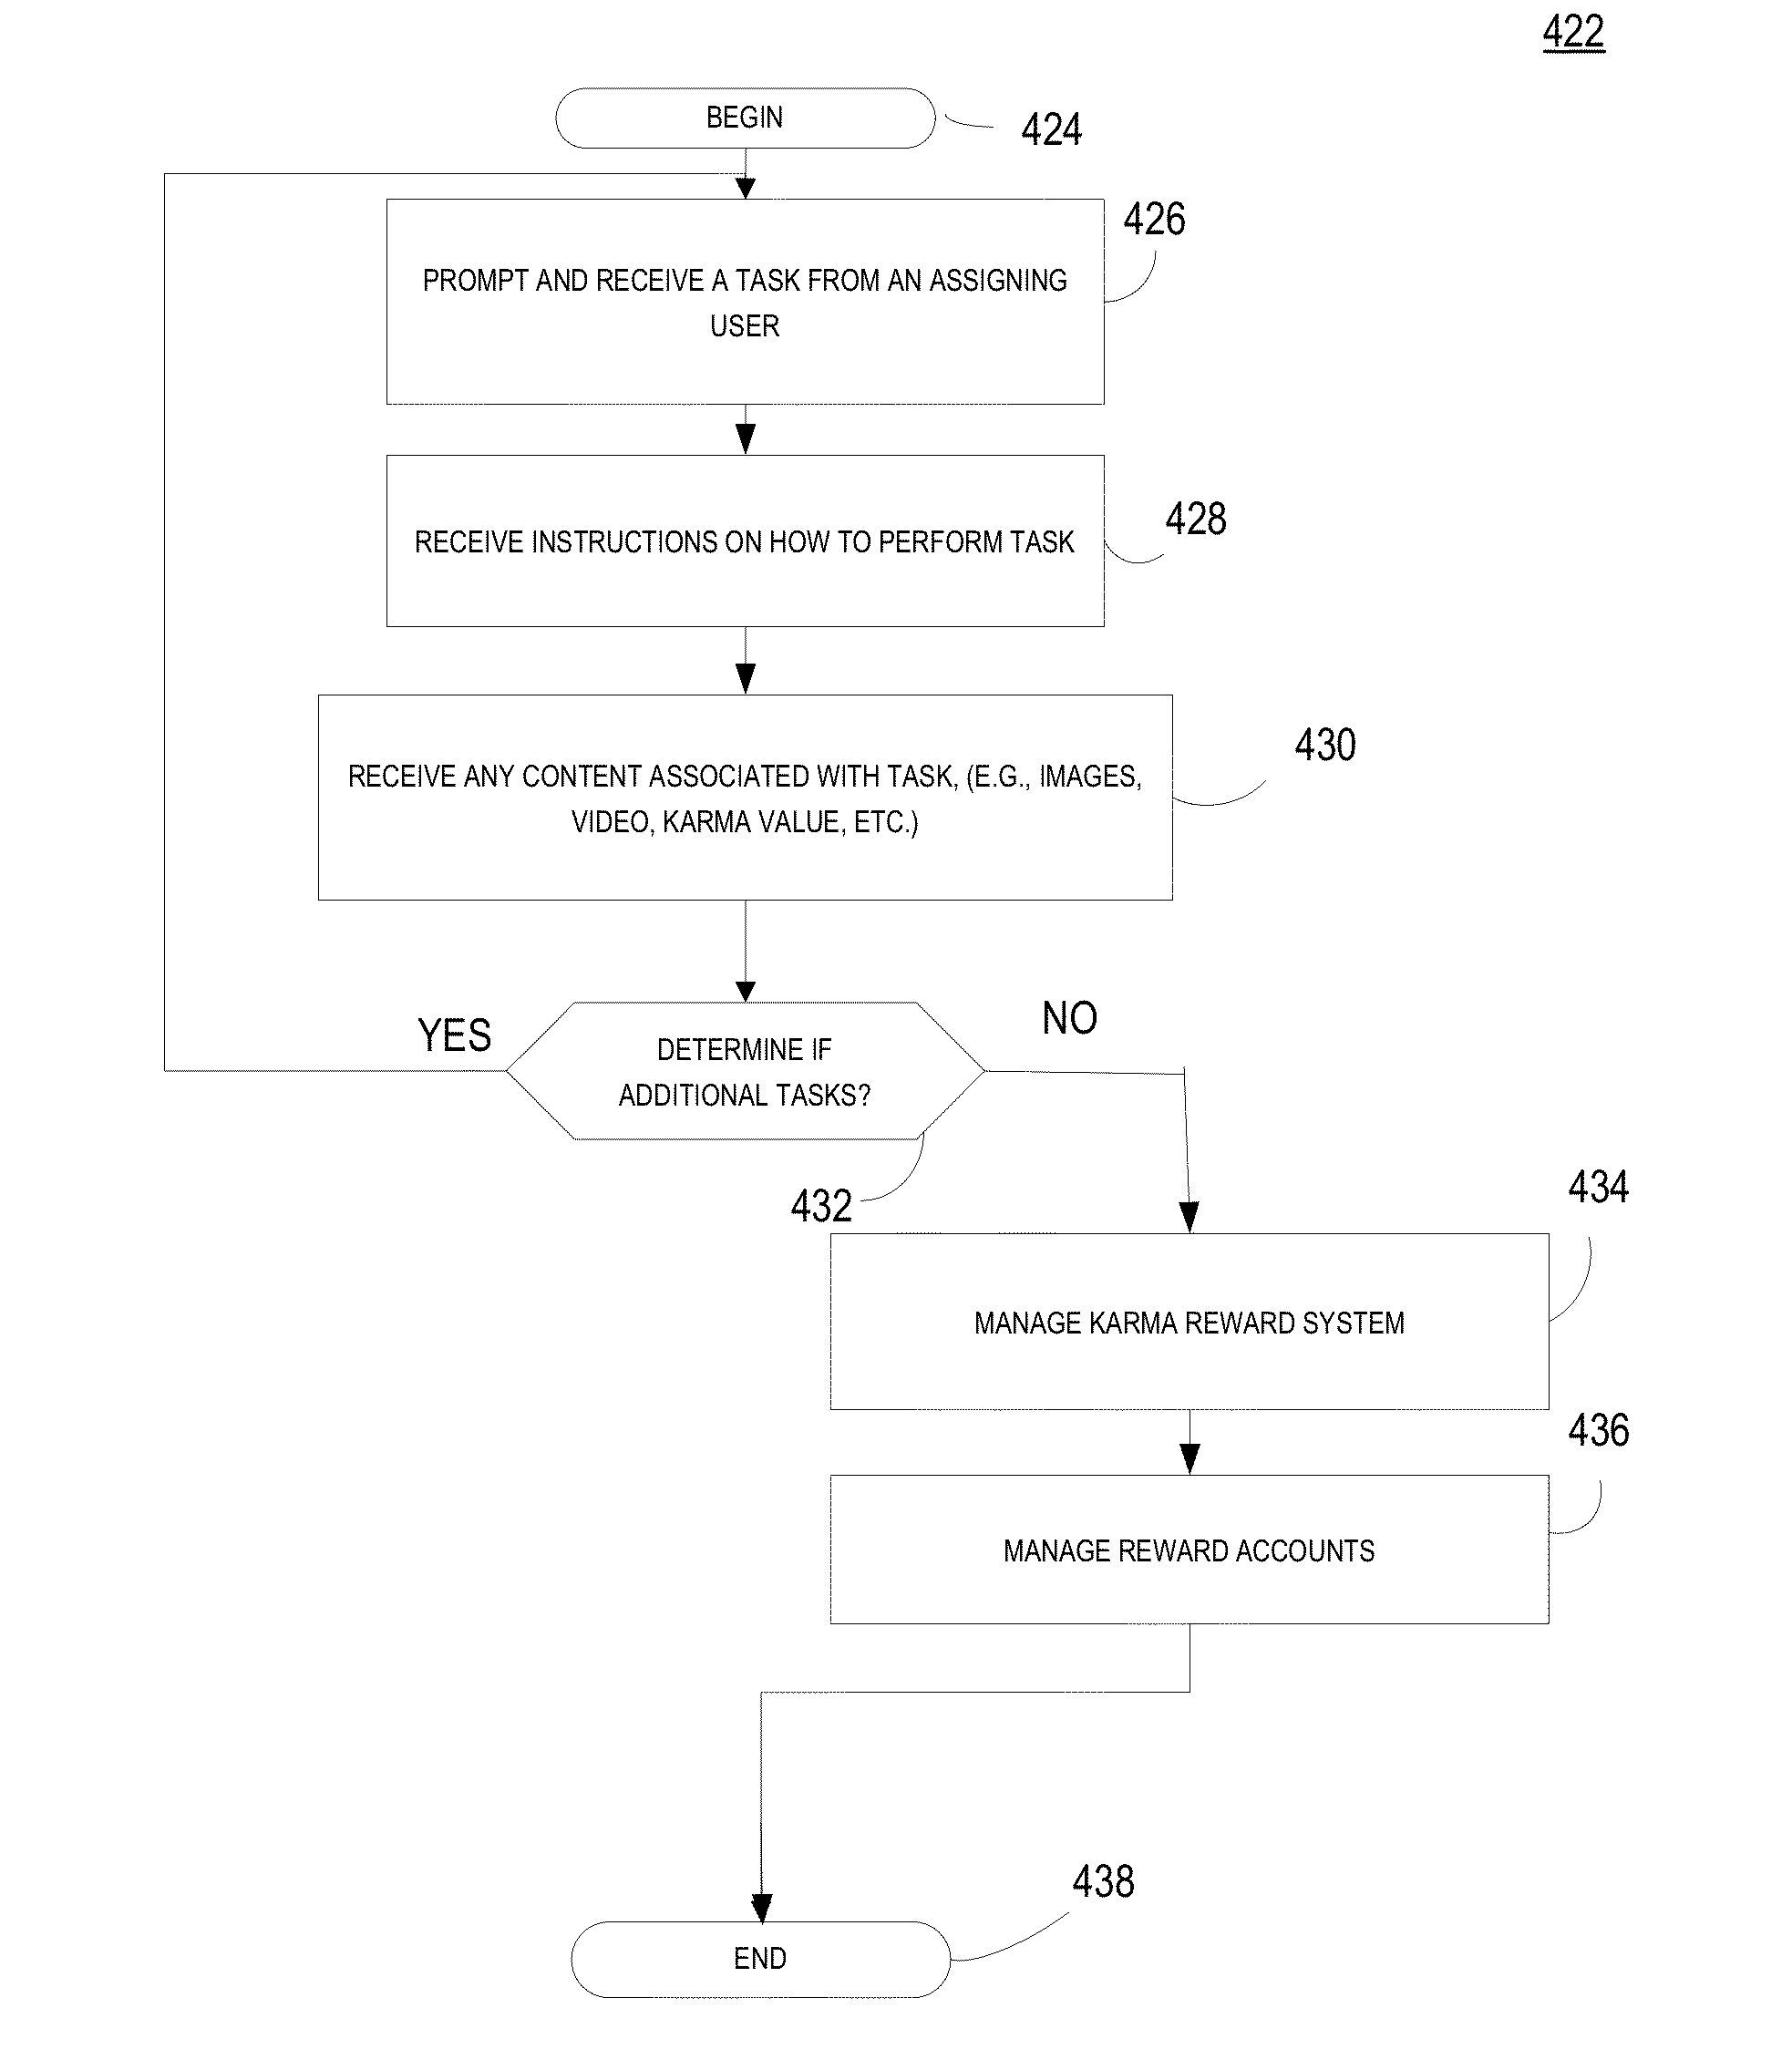 Merit-based incentive to-do list application system, method and computer program product